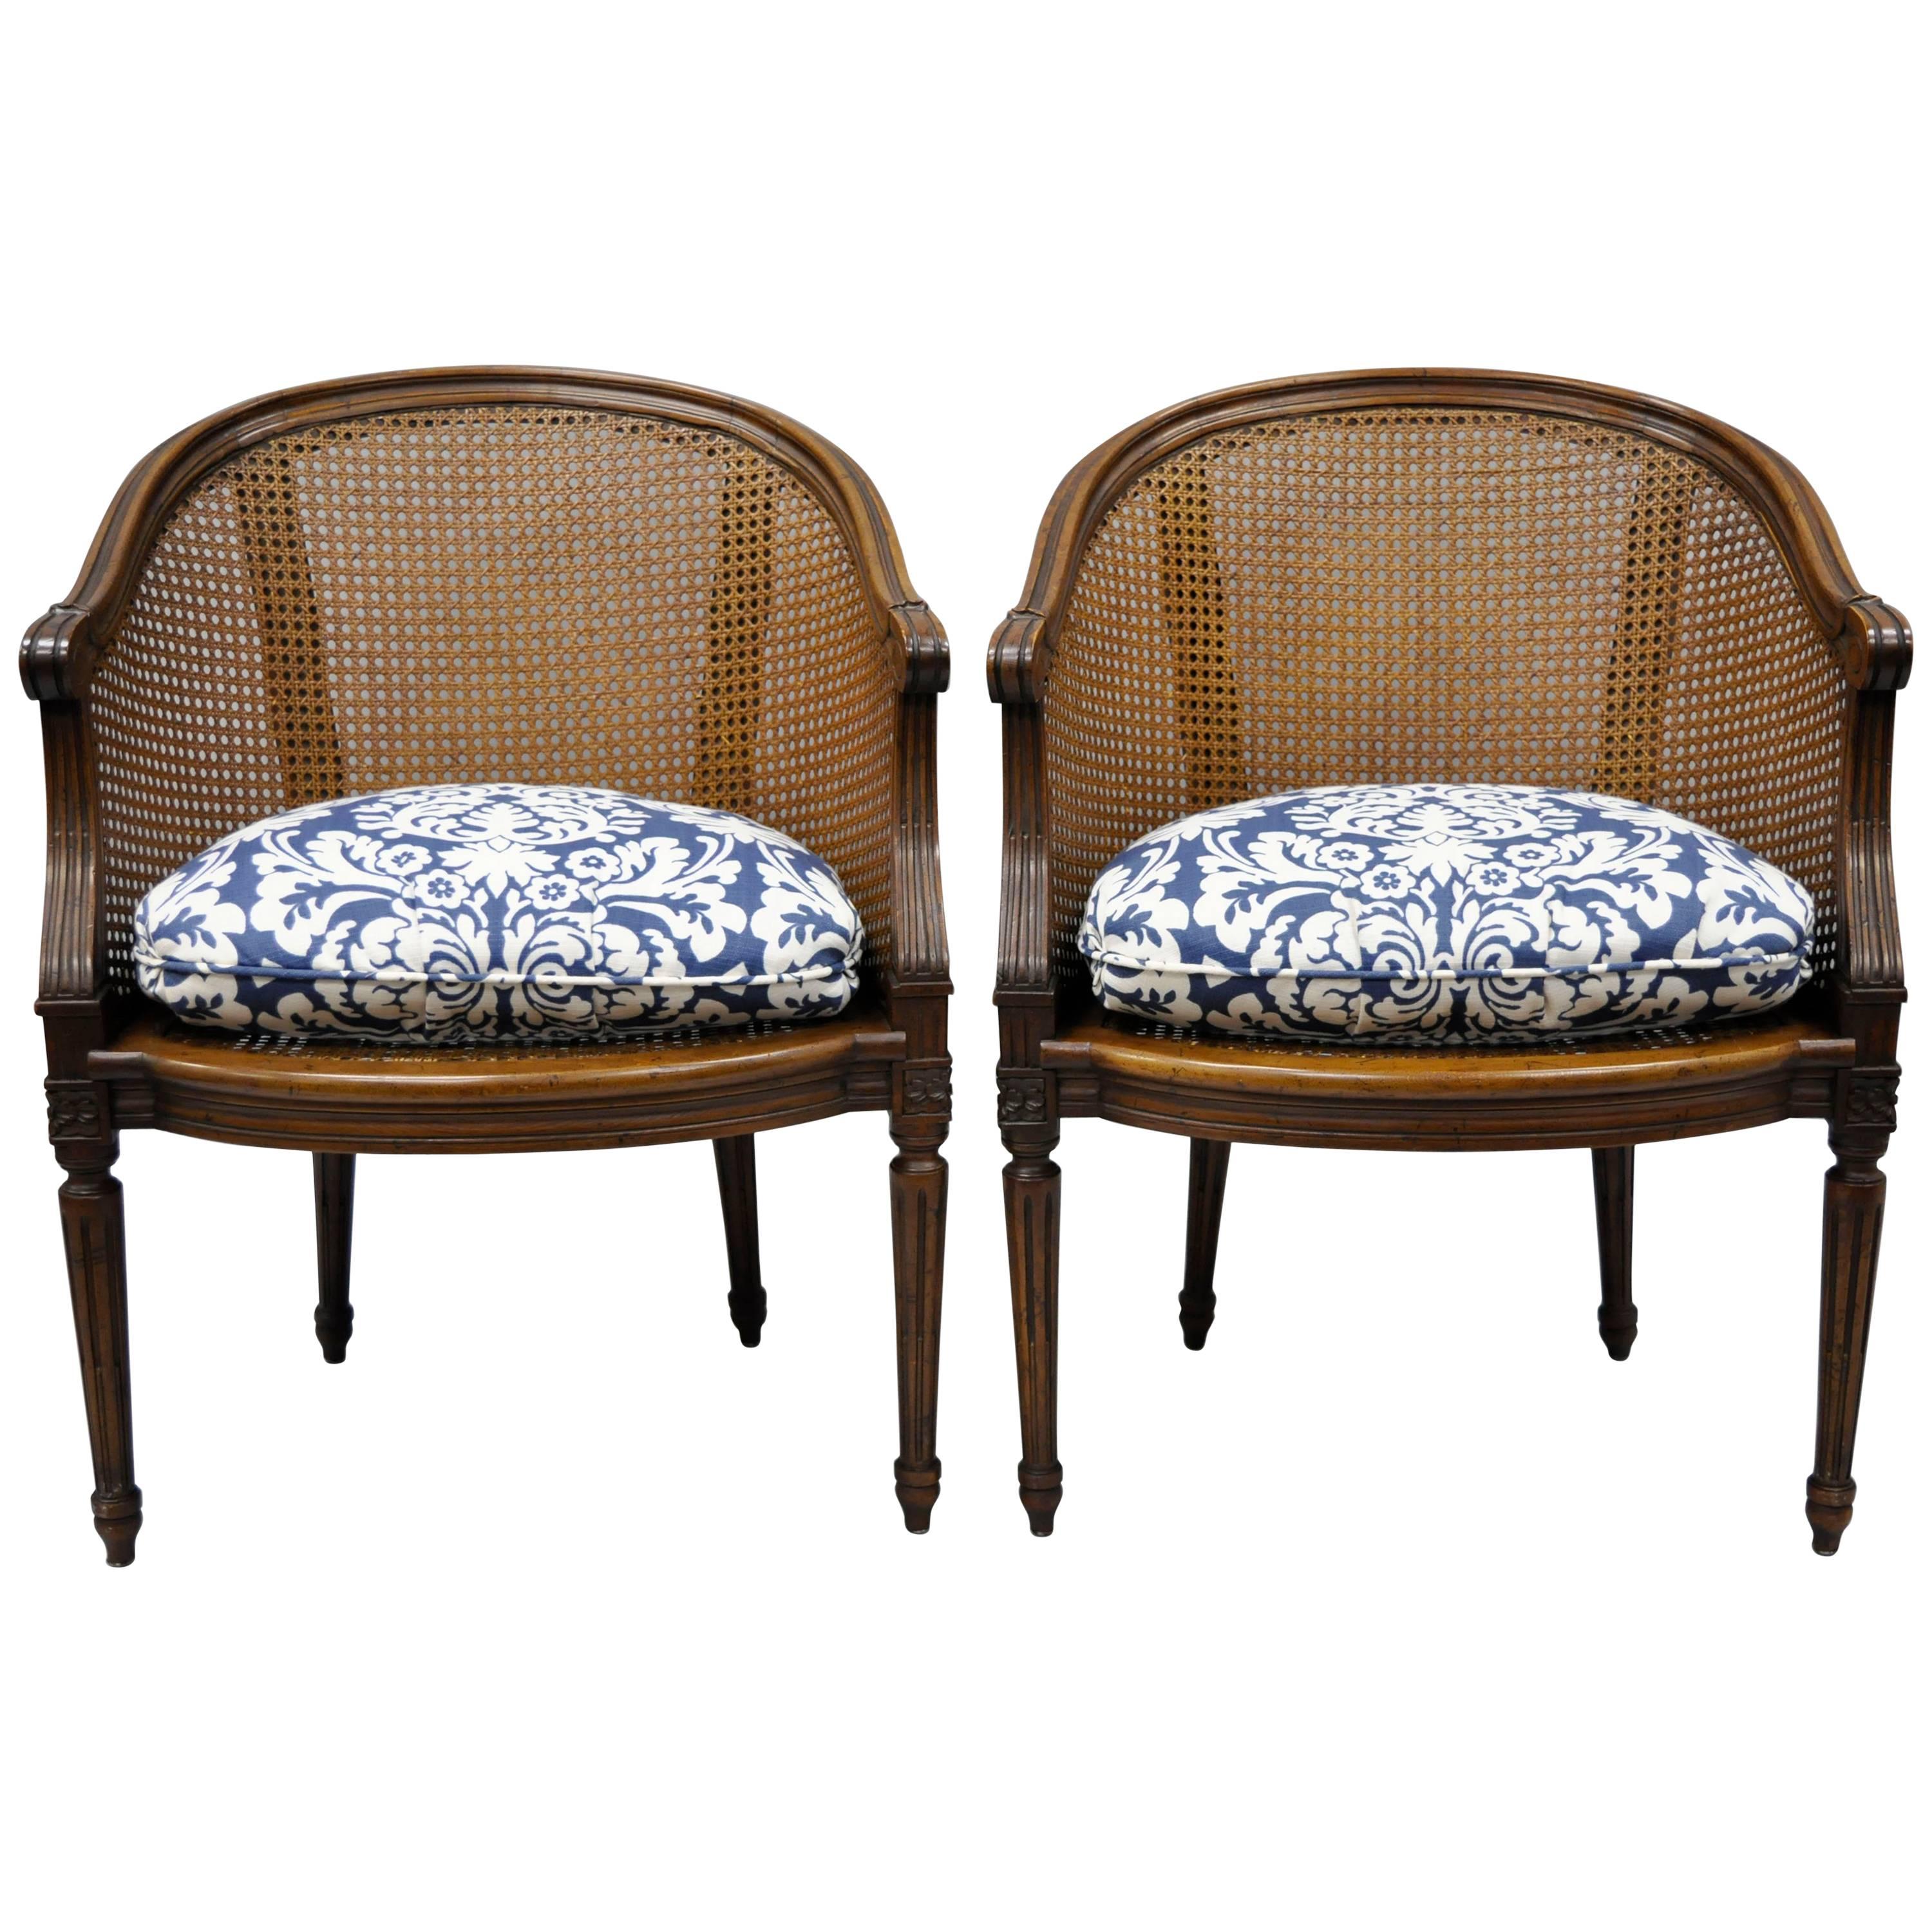 Pair of French Louis XVI Style Walnut and Cane Barrel Back Chairs by Heritage